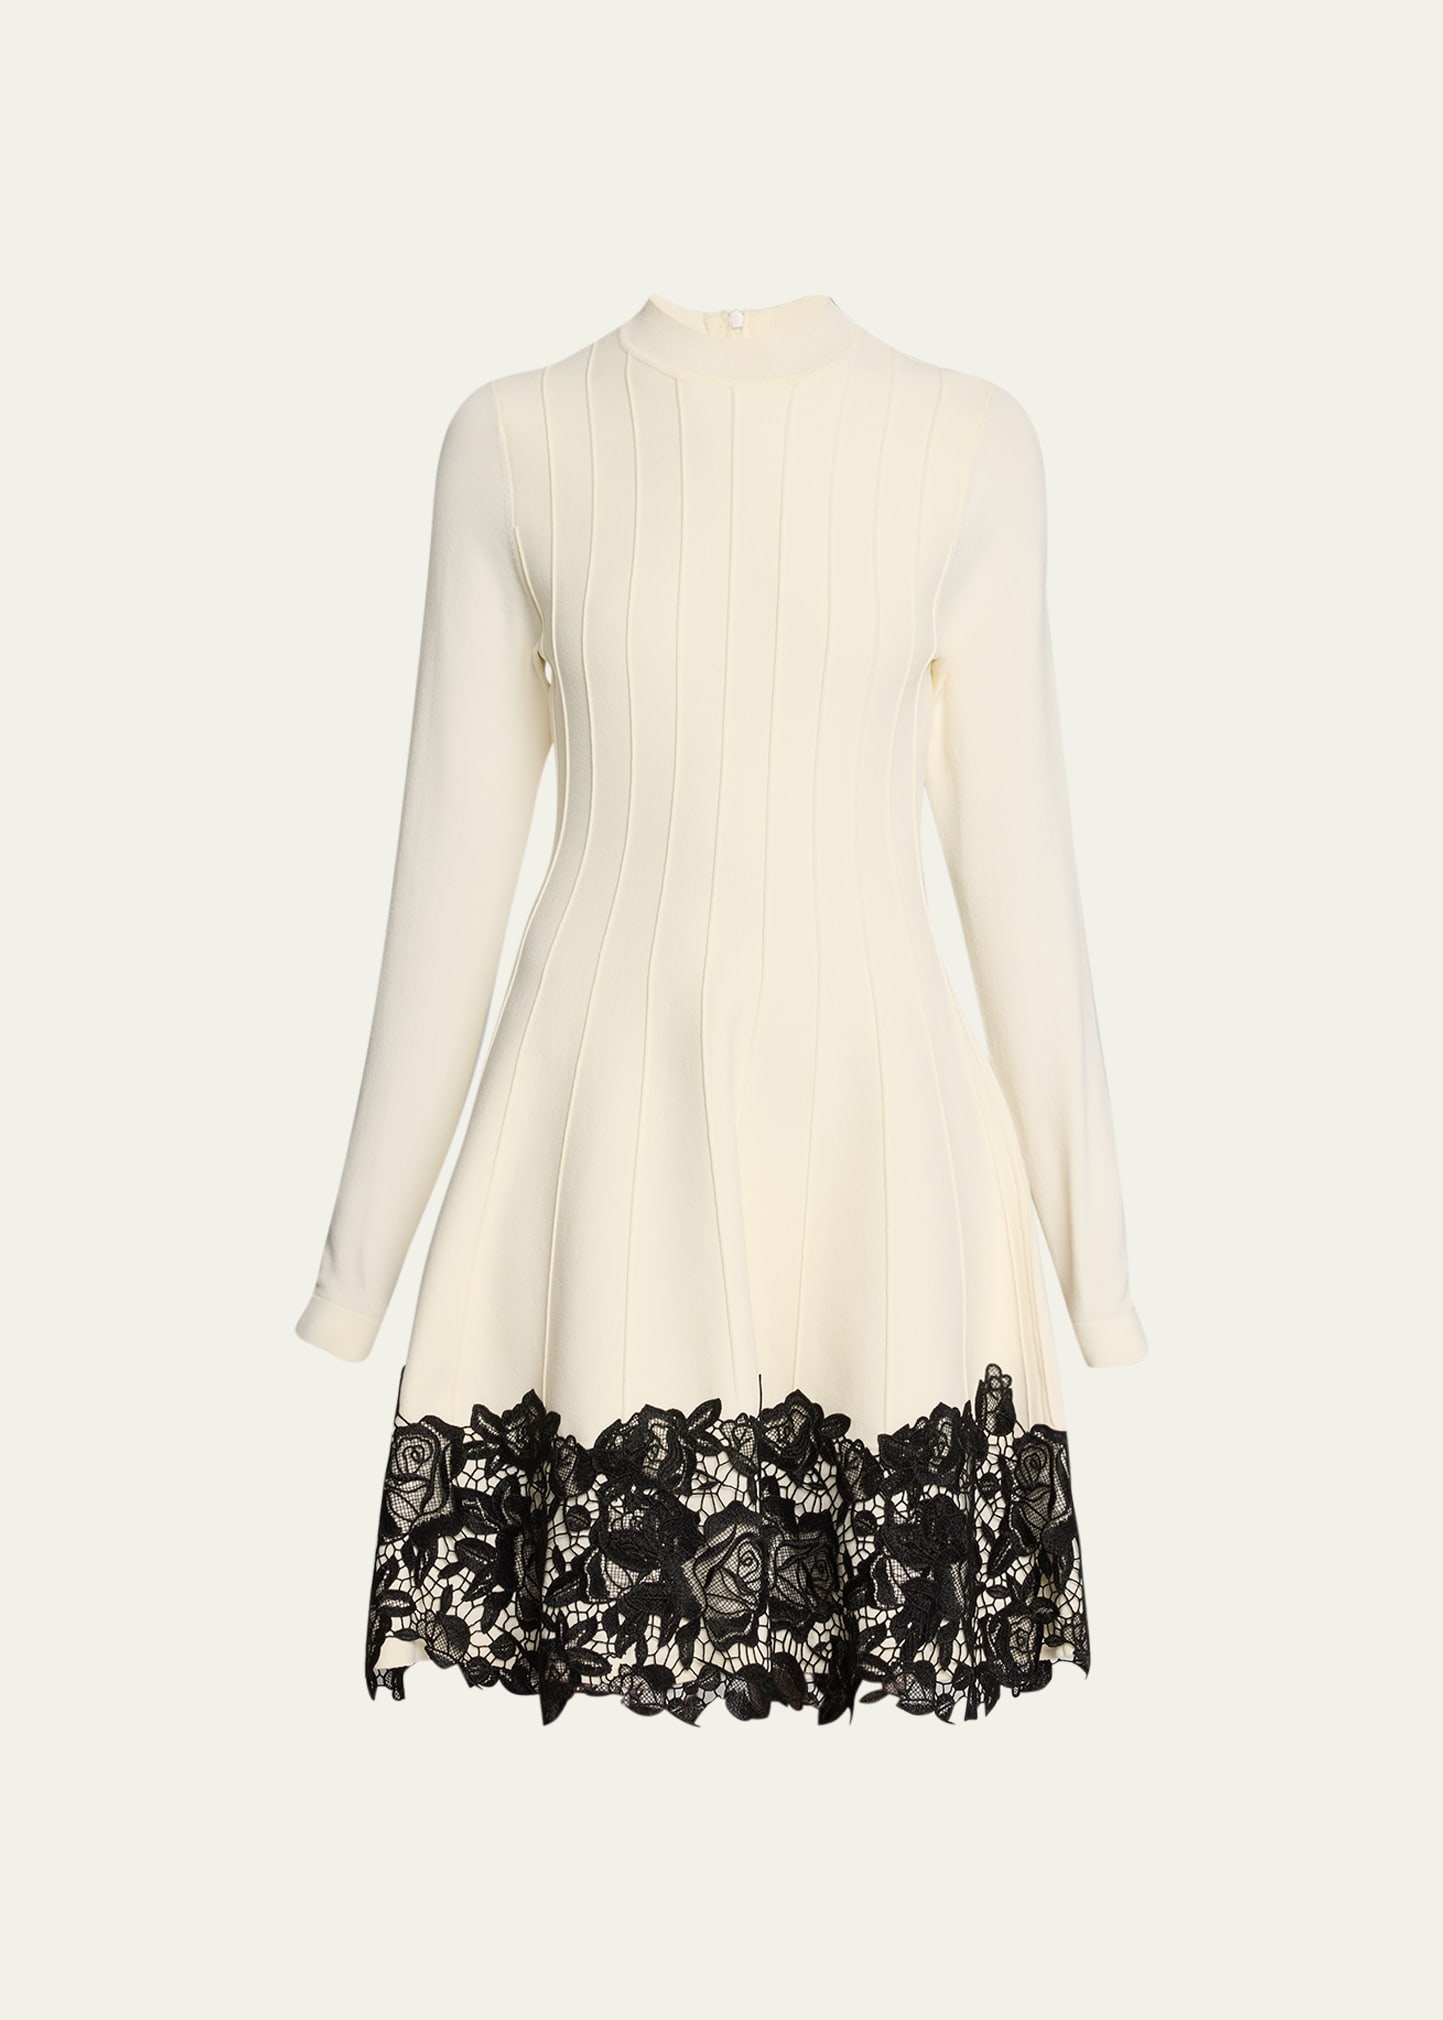 Lela Rose Georgia Short Dress With Floral Lace In Ivory Black